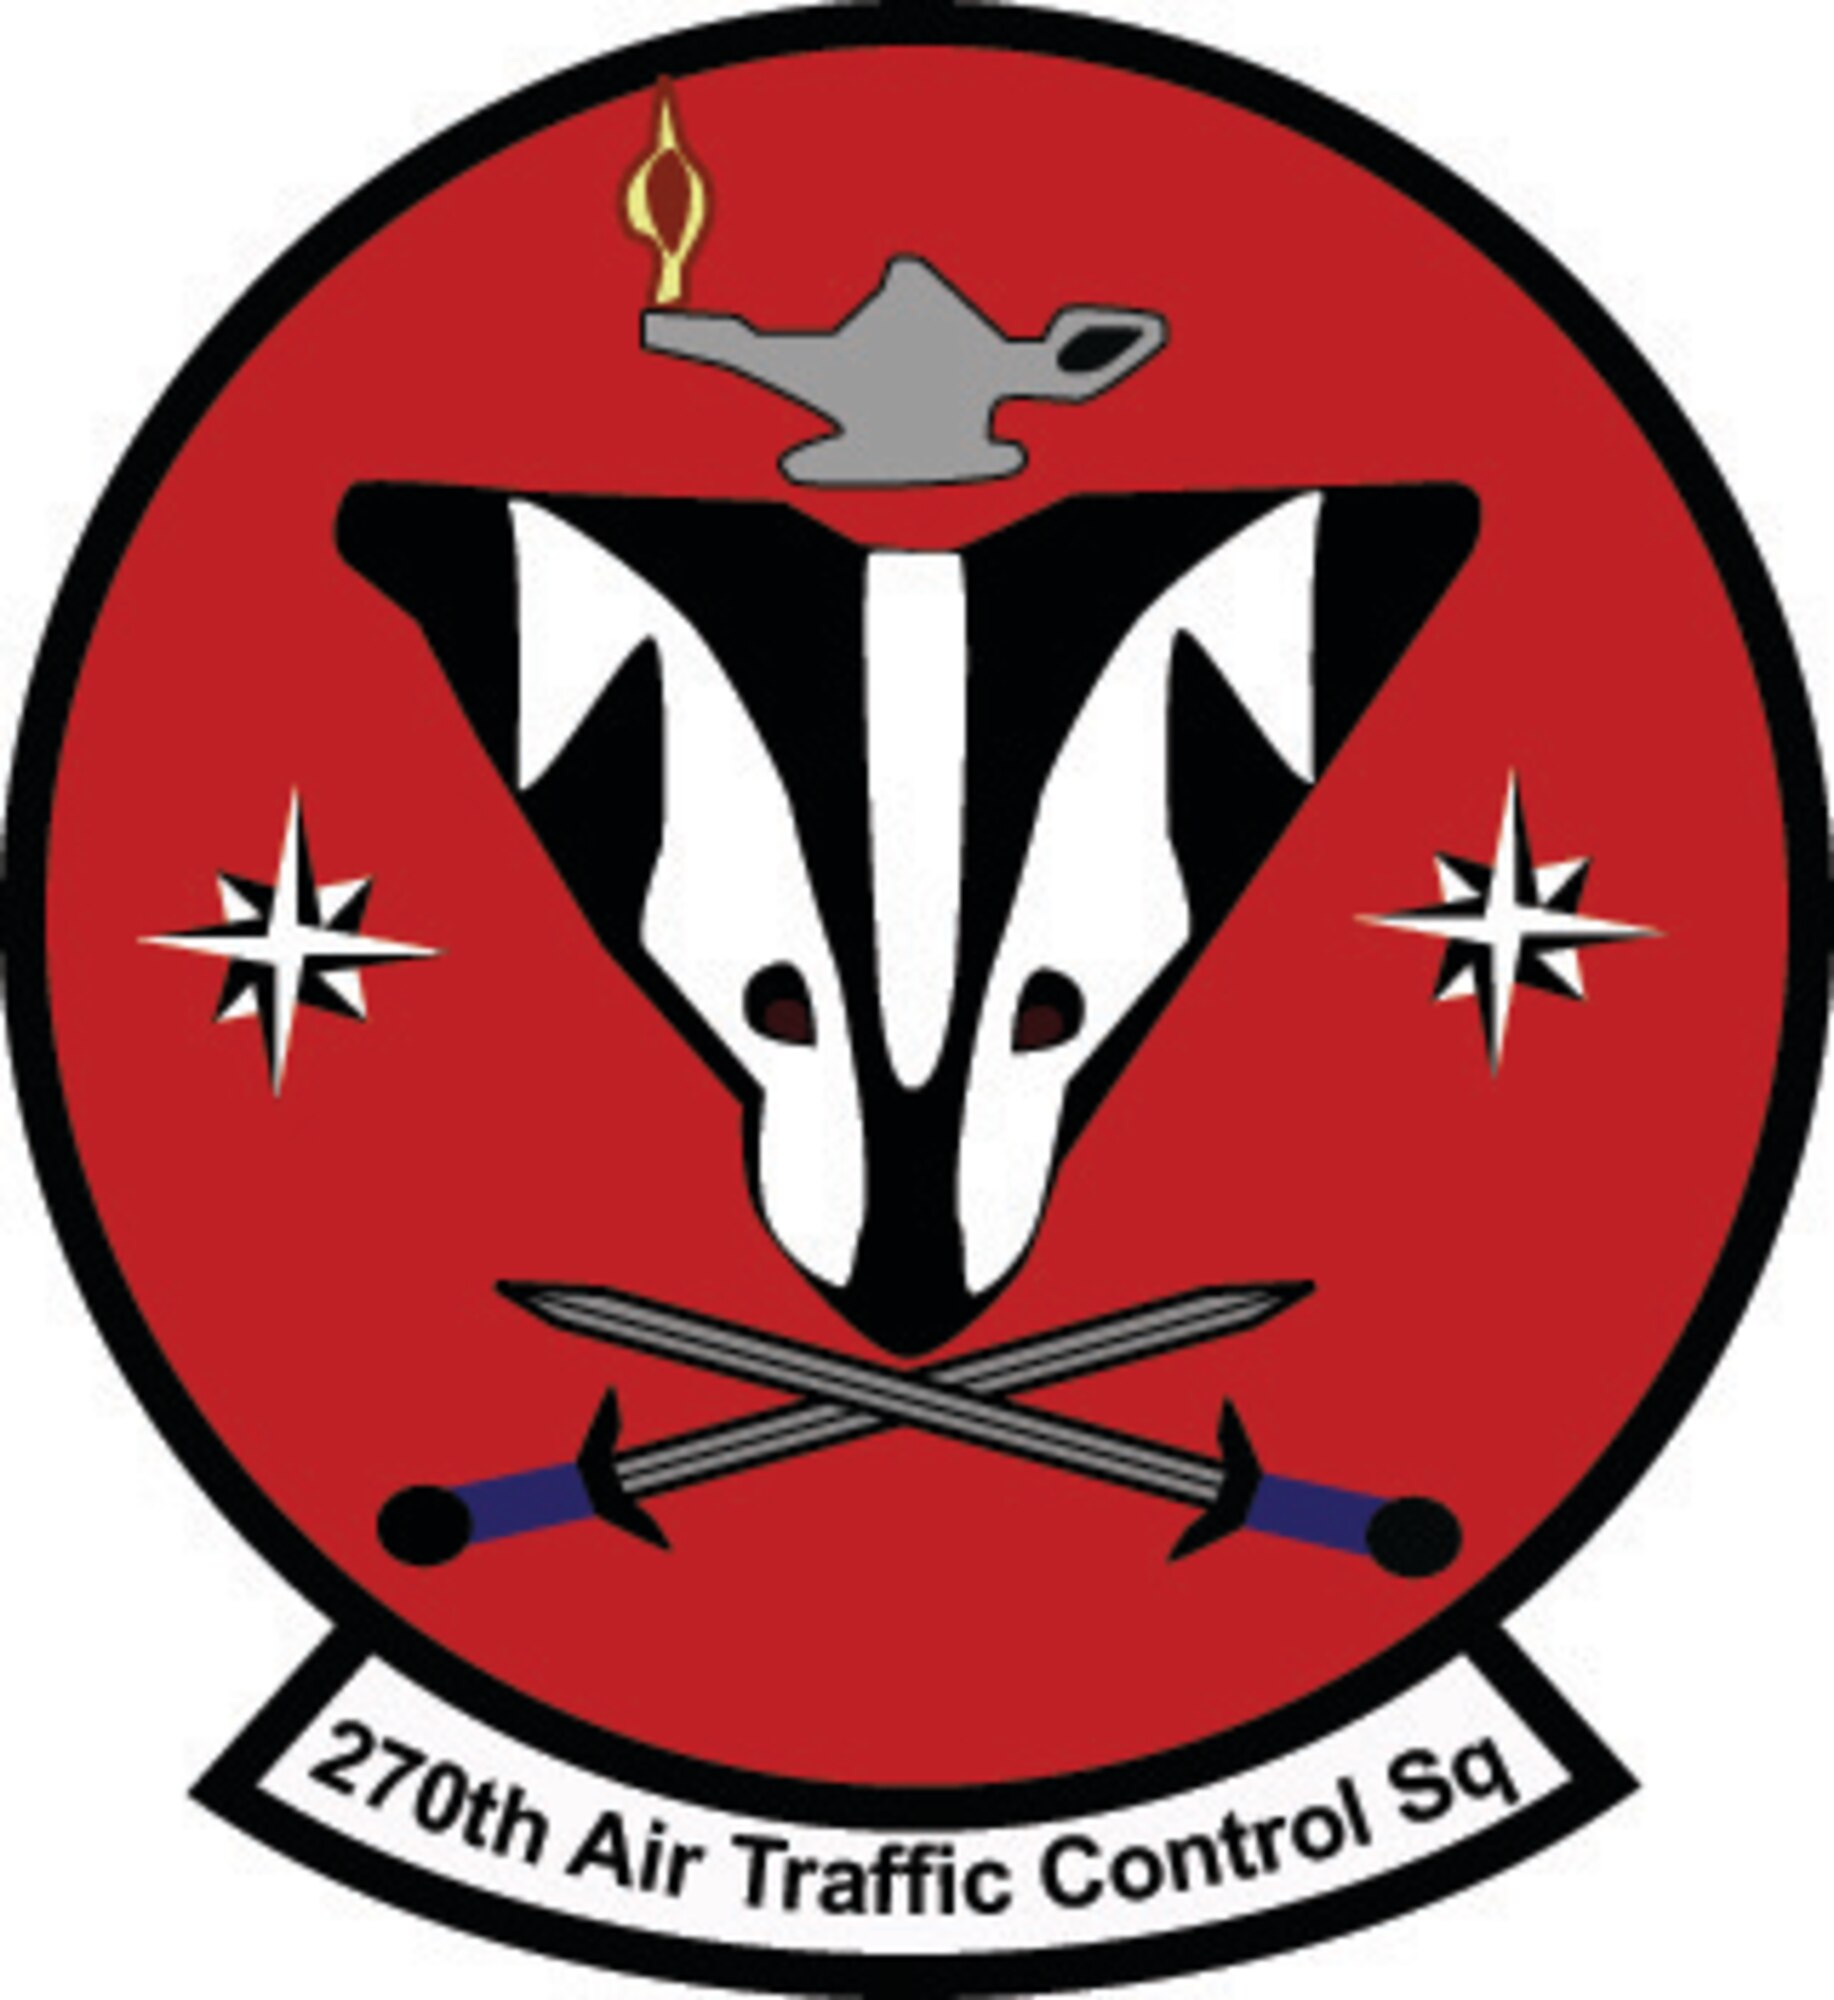 Pictured is the patch for the 270th Air Traffic Control Squadron which has been a part of the Oregon Headquarters Combat Operations Group.  As of Oct. 1, 2015 the 270th ATCS will now fall under the 173rd Fighter Wing Operations Group as part of a realignment to bring all of the COG under the two state fighter Wings.  